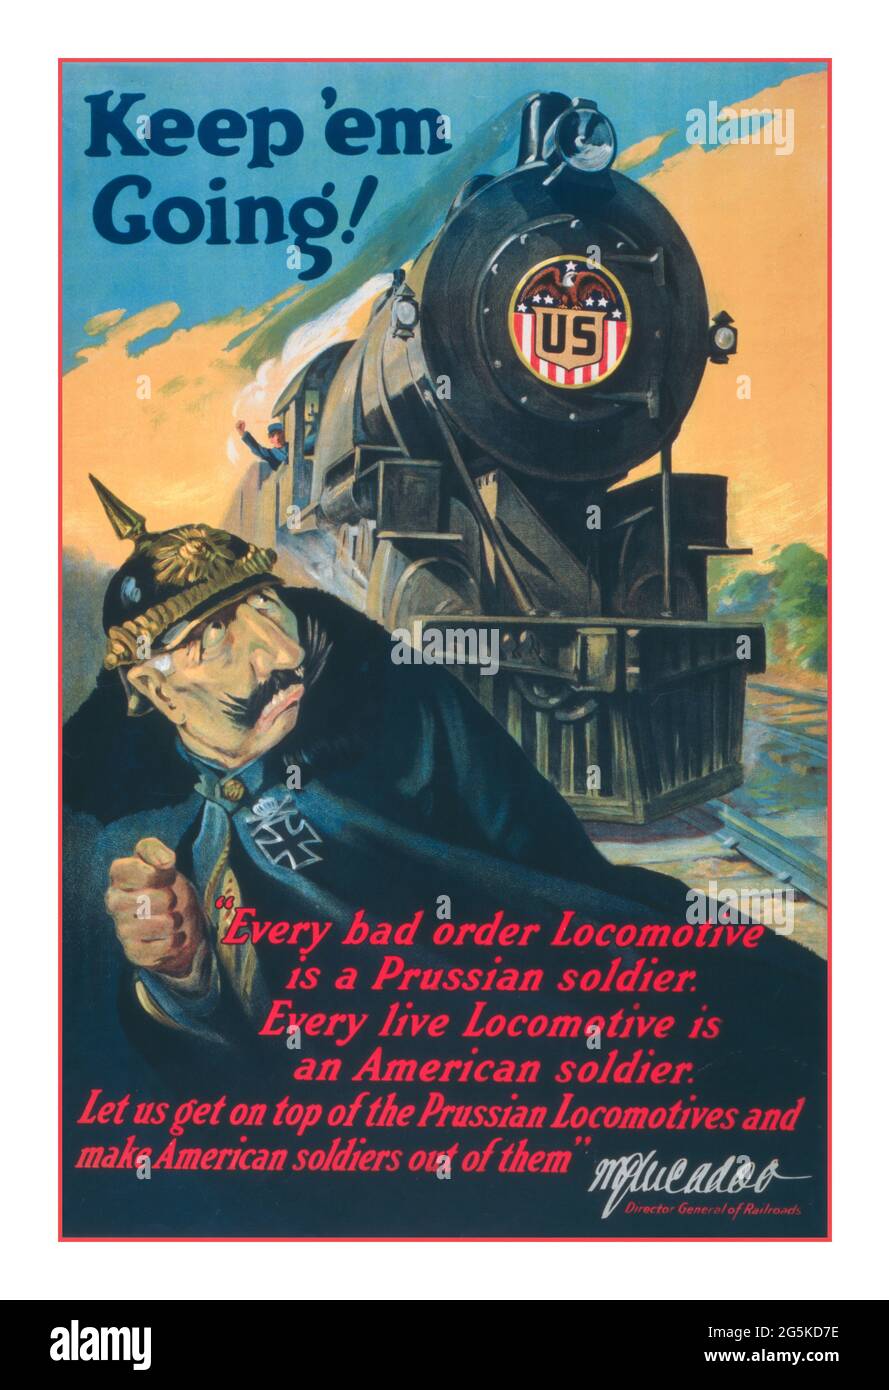 WW1 Propaganda USA Poster 'Keep 'em going'! / Ketterlinus Phila. Poster showing a German soldier fleeing from an oncoming locomotive bearing insignia, 'U.S.' McAdoo, W. G. (William Gibbs), 1863-1941. [1917] World War, 1914-1918--Economic & industrial aspects--United States -  World War, 1914-1918--Transportation -  Railroad locomotives--1910-1920Lithographs--Color--1910-1920. War posters--American--1910-1920.  'Every bad order locomotive is a Prussian soldier. Every live locomotive is an American soldier. Let us get on top of the Prussian locomotives and make American soldiers out of them Stock Photo